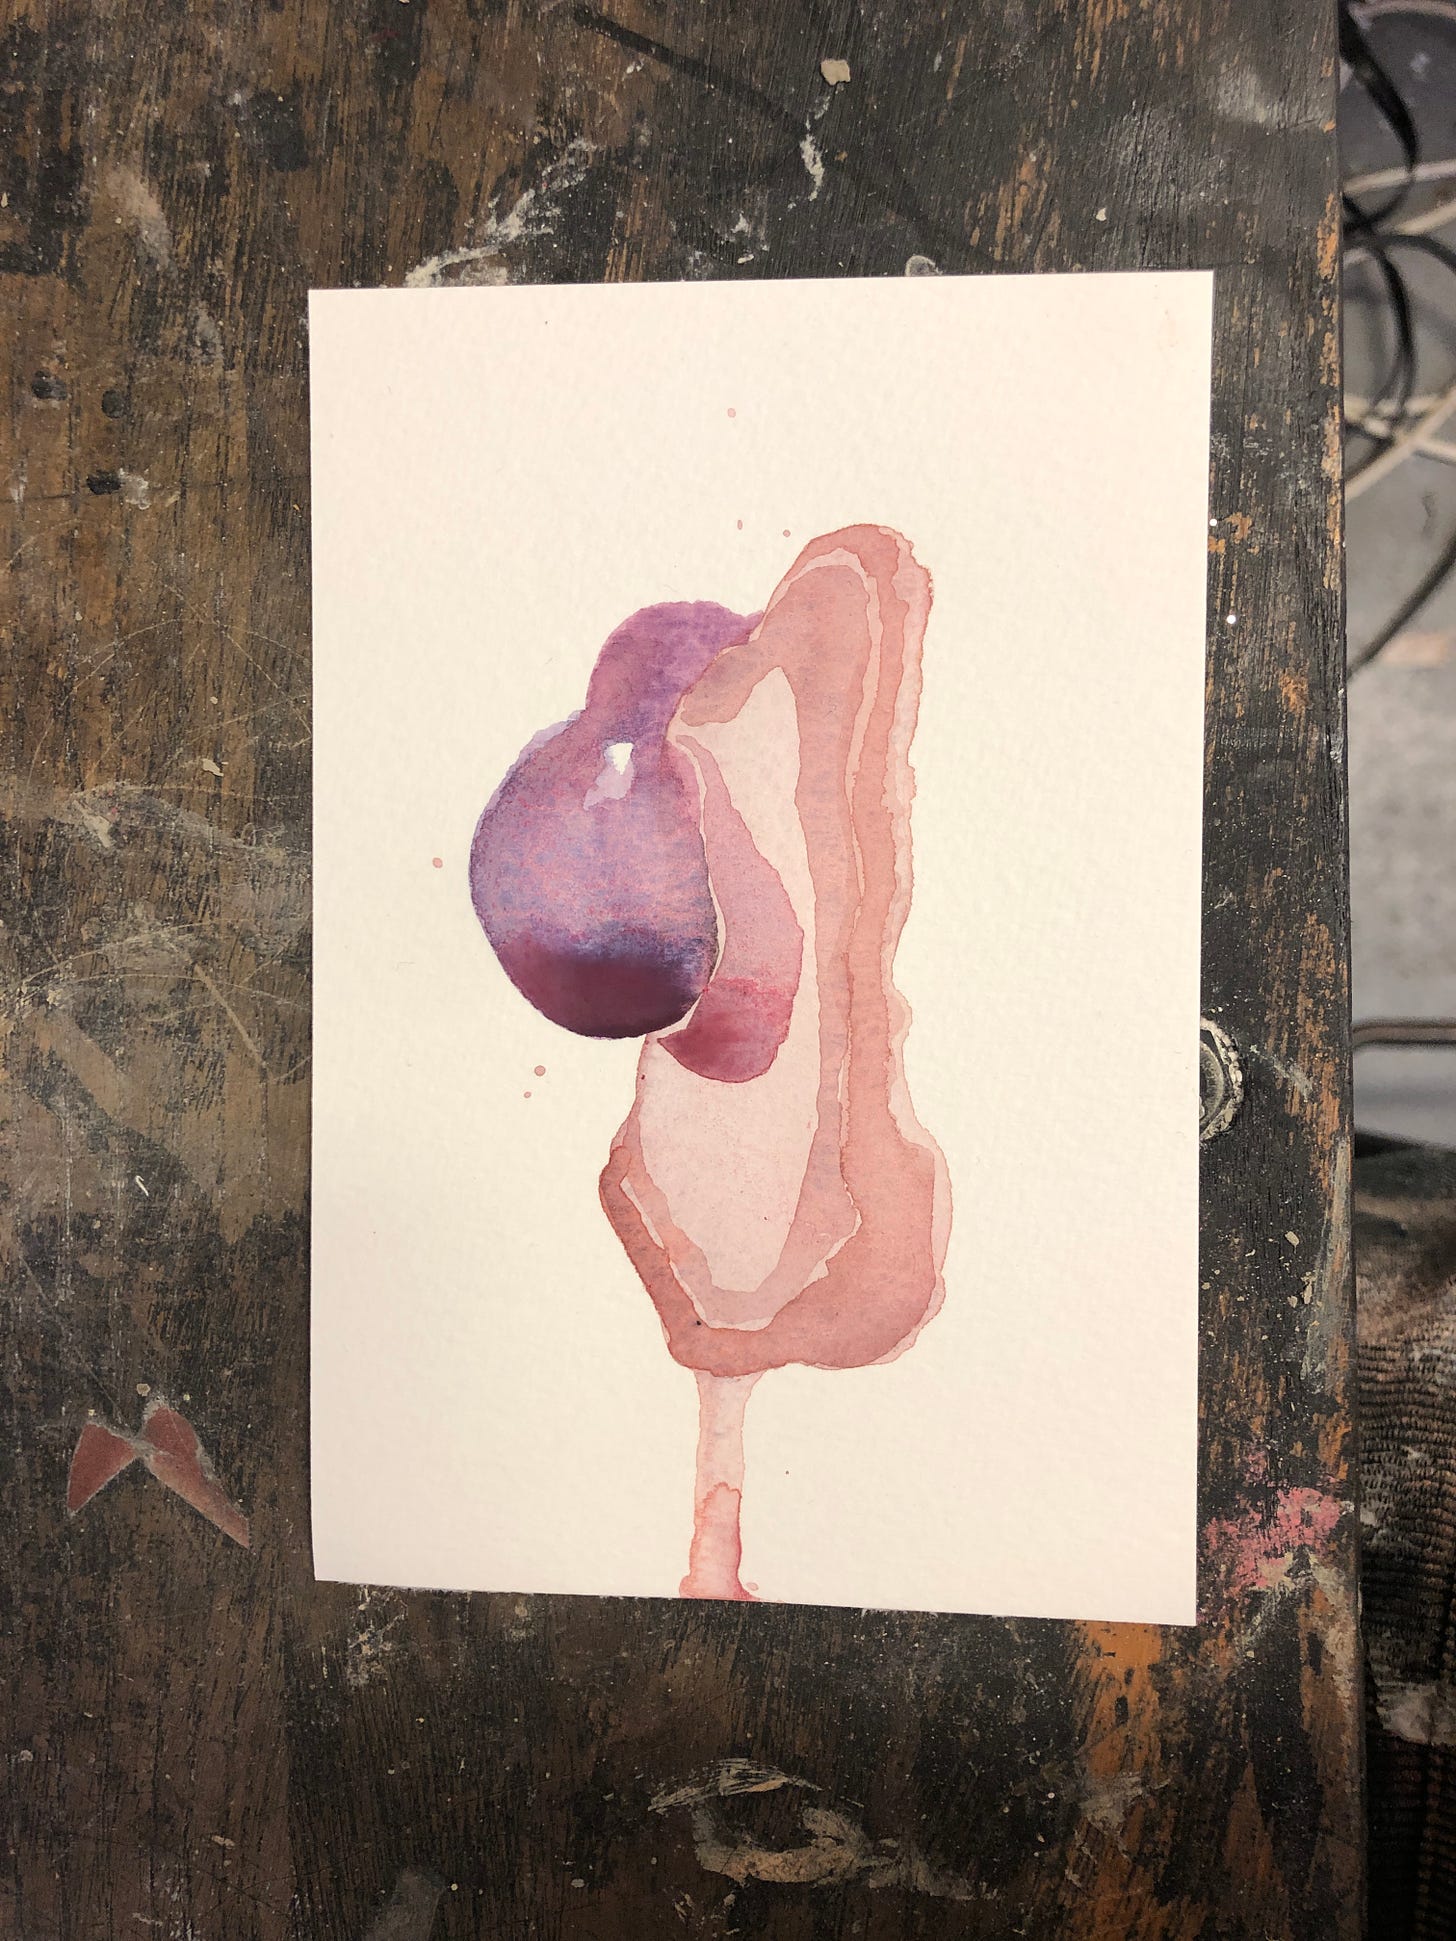 A small watercolour painting of what looks like an organ, painted in watery flesh colours.